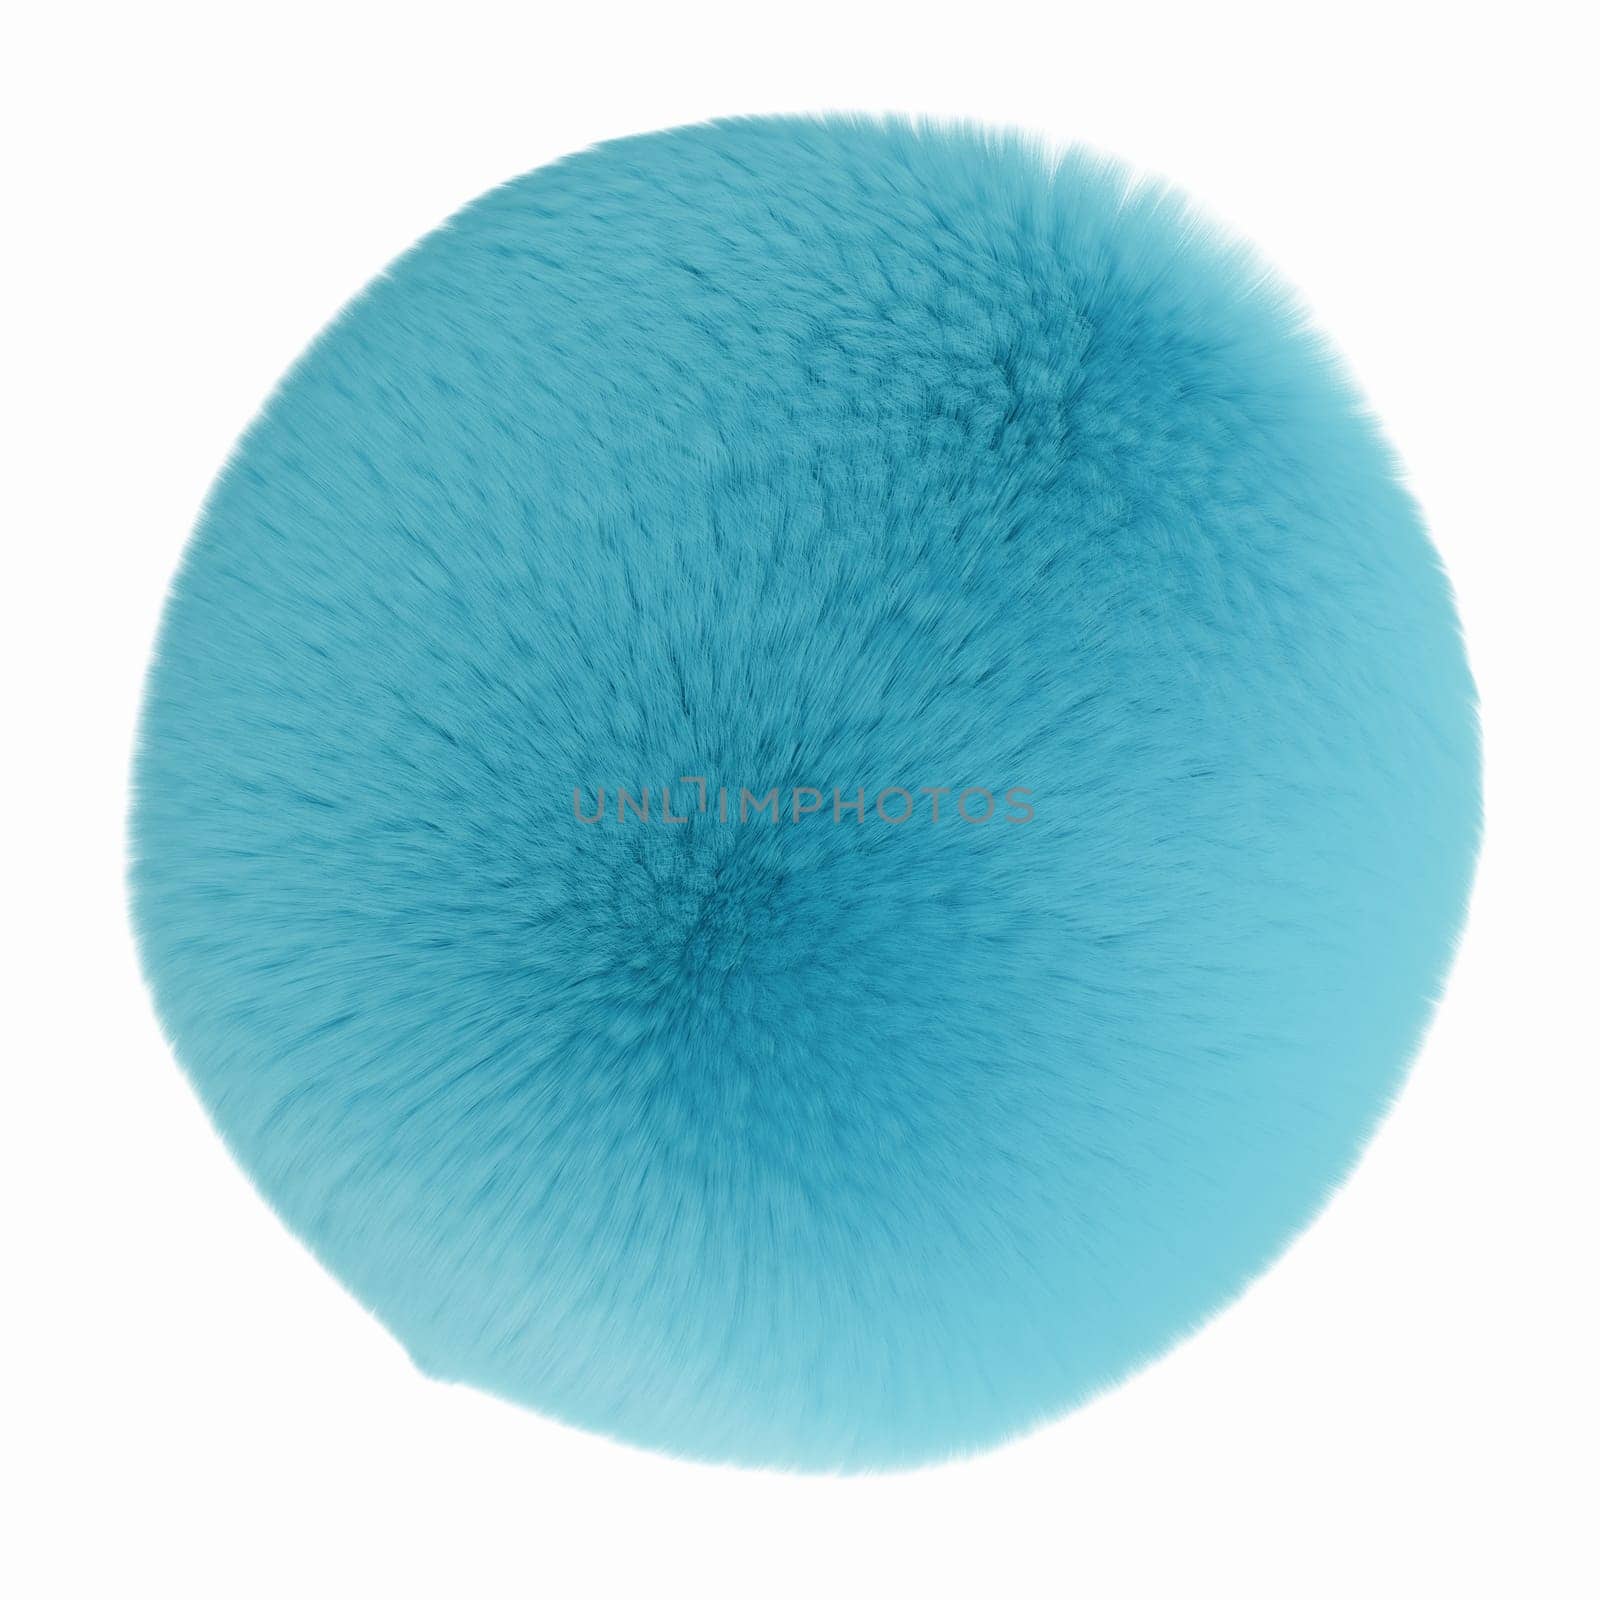 Fluffy blue 3D geometric shape, isolated on white background. Furry, soft and hairy sphere. Trendy, cute design element. Cut out object. 3D rendering